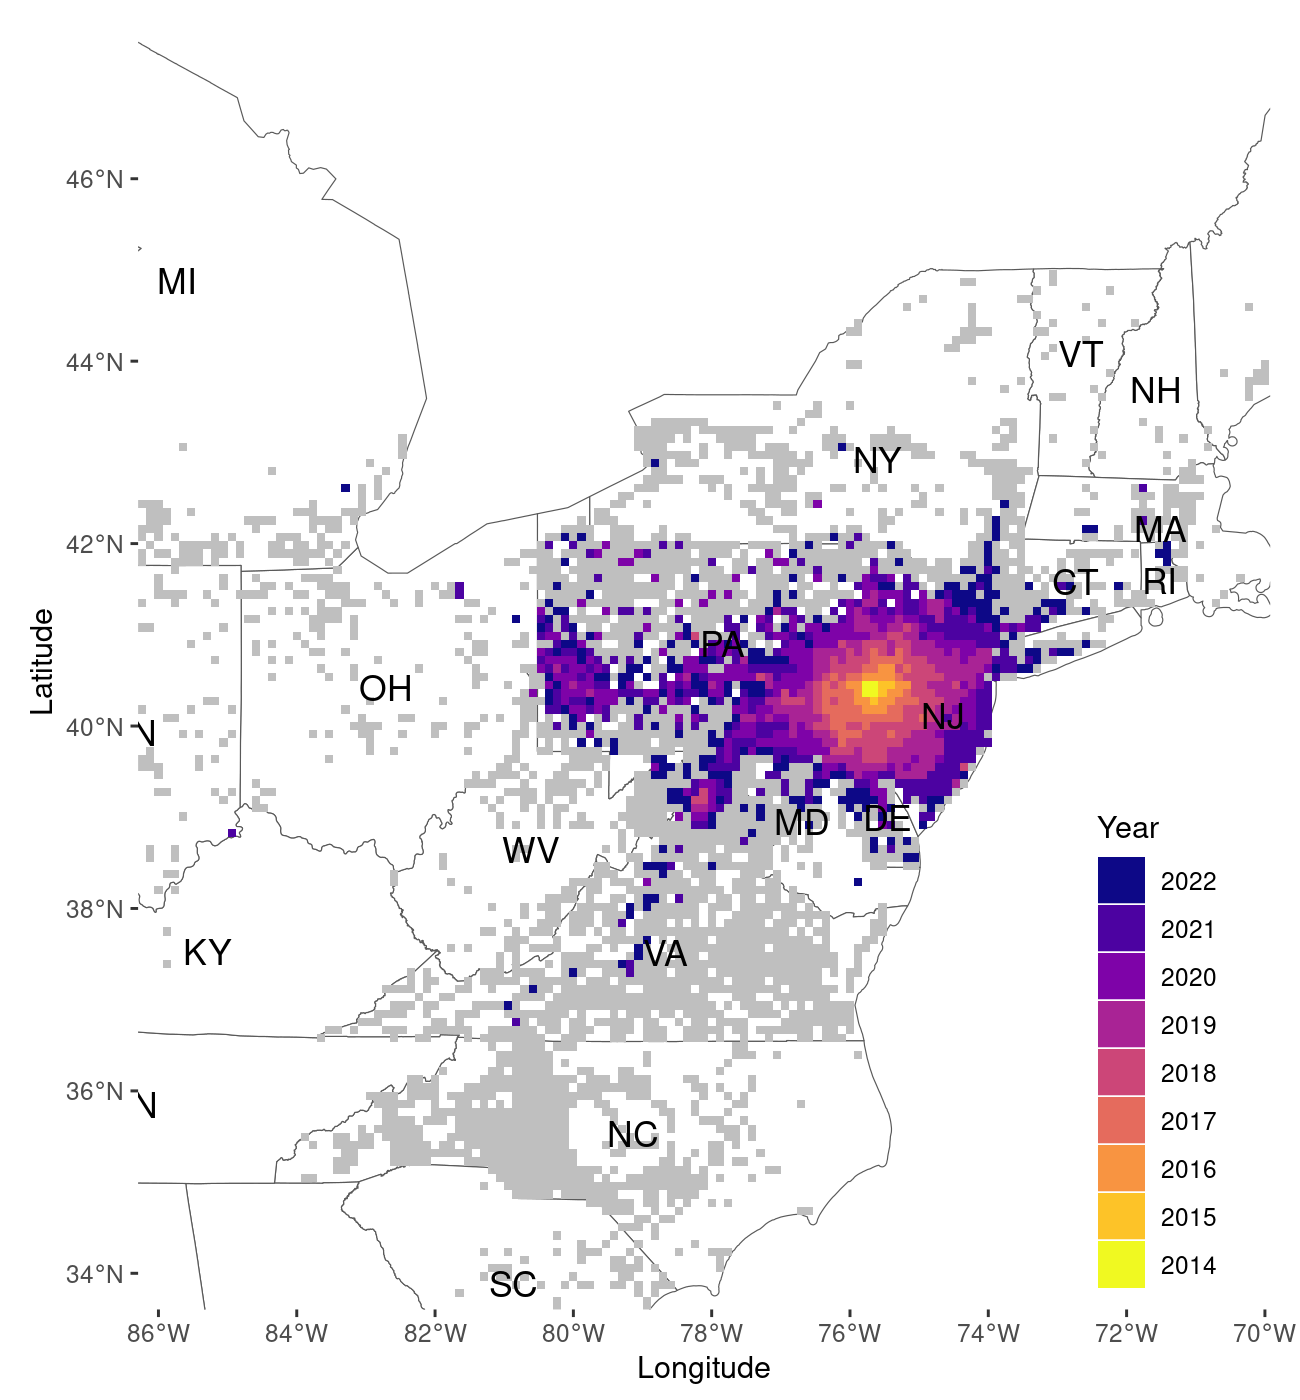 Output of the `map_spread()` function, plotted at the 10km resolution